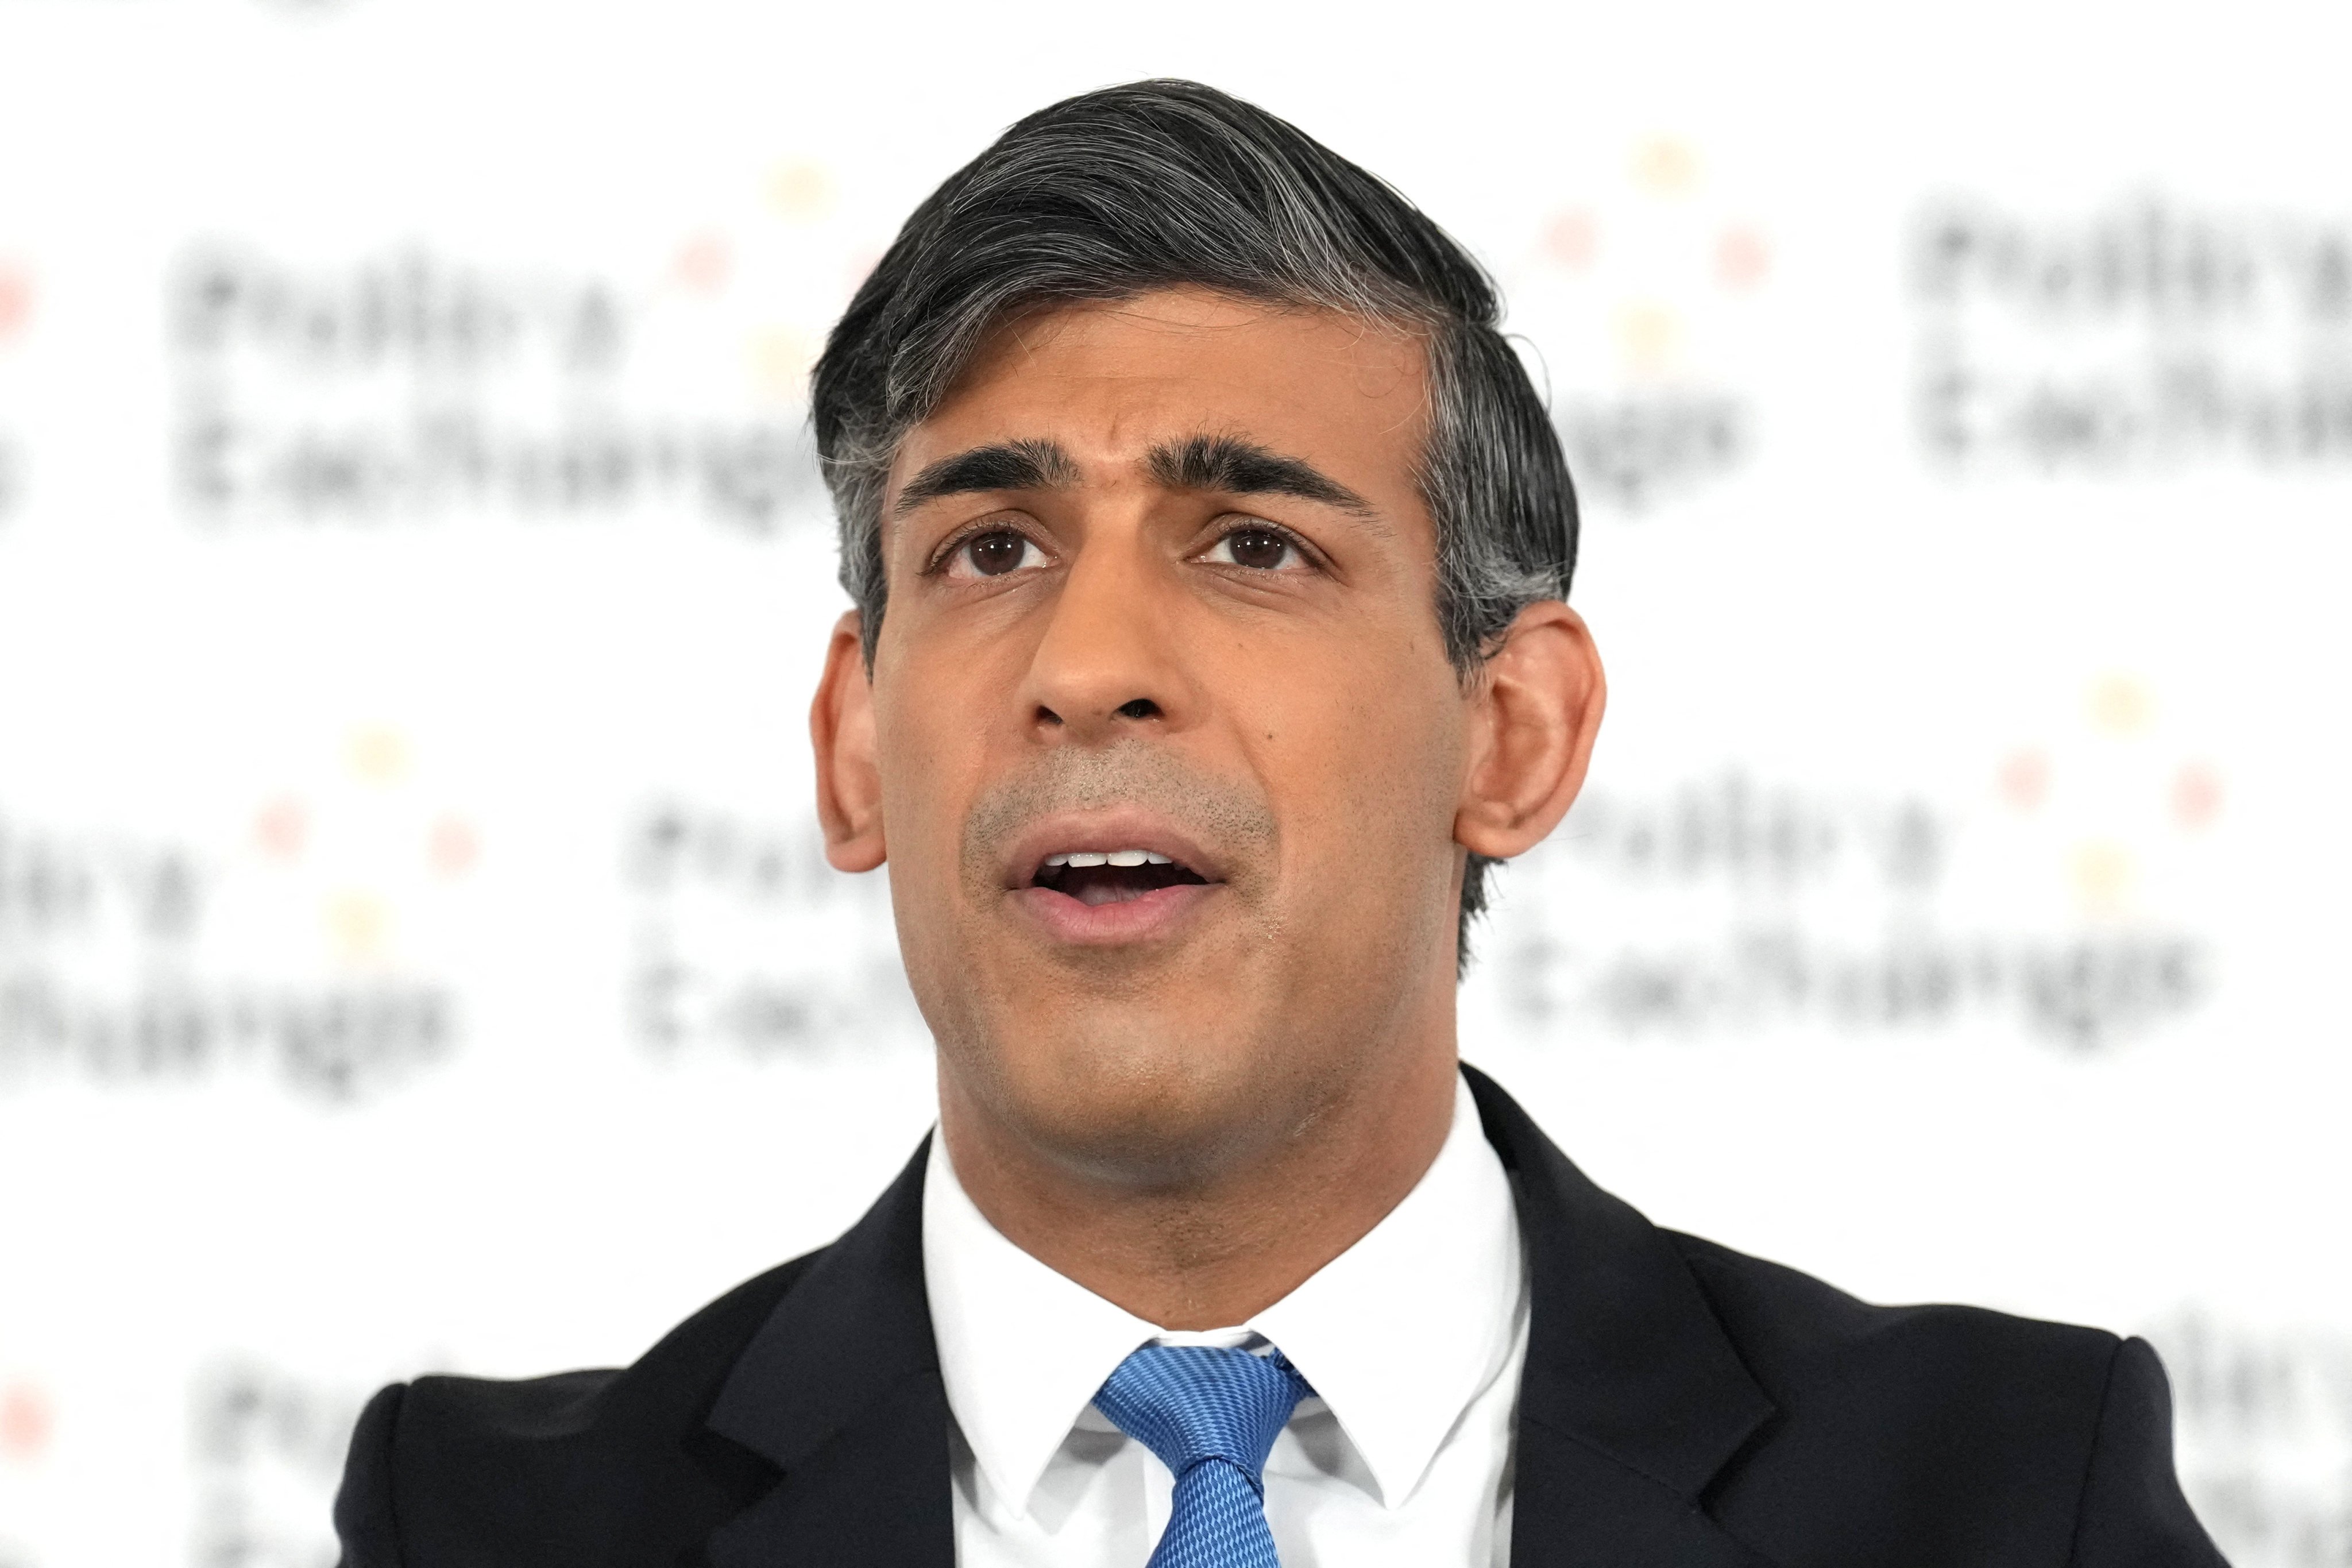 Britain’s Prime Minister Rishi Sunak insists his Conservative party can win a general election despite polls consistently indicating the opposite, but refused to set a date for the vote. Photo: Pool via Reuters